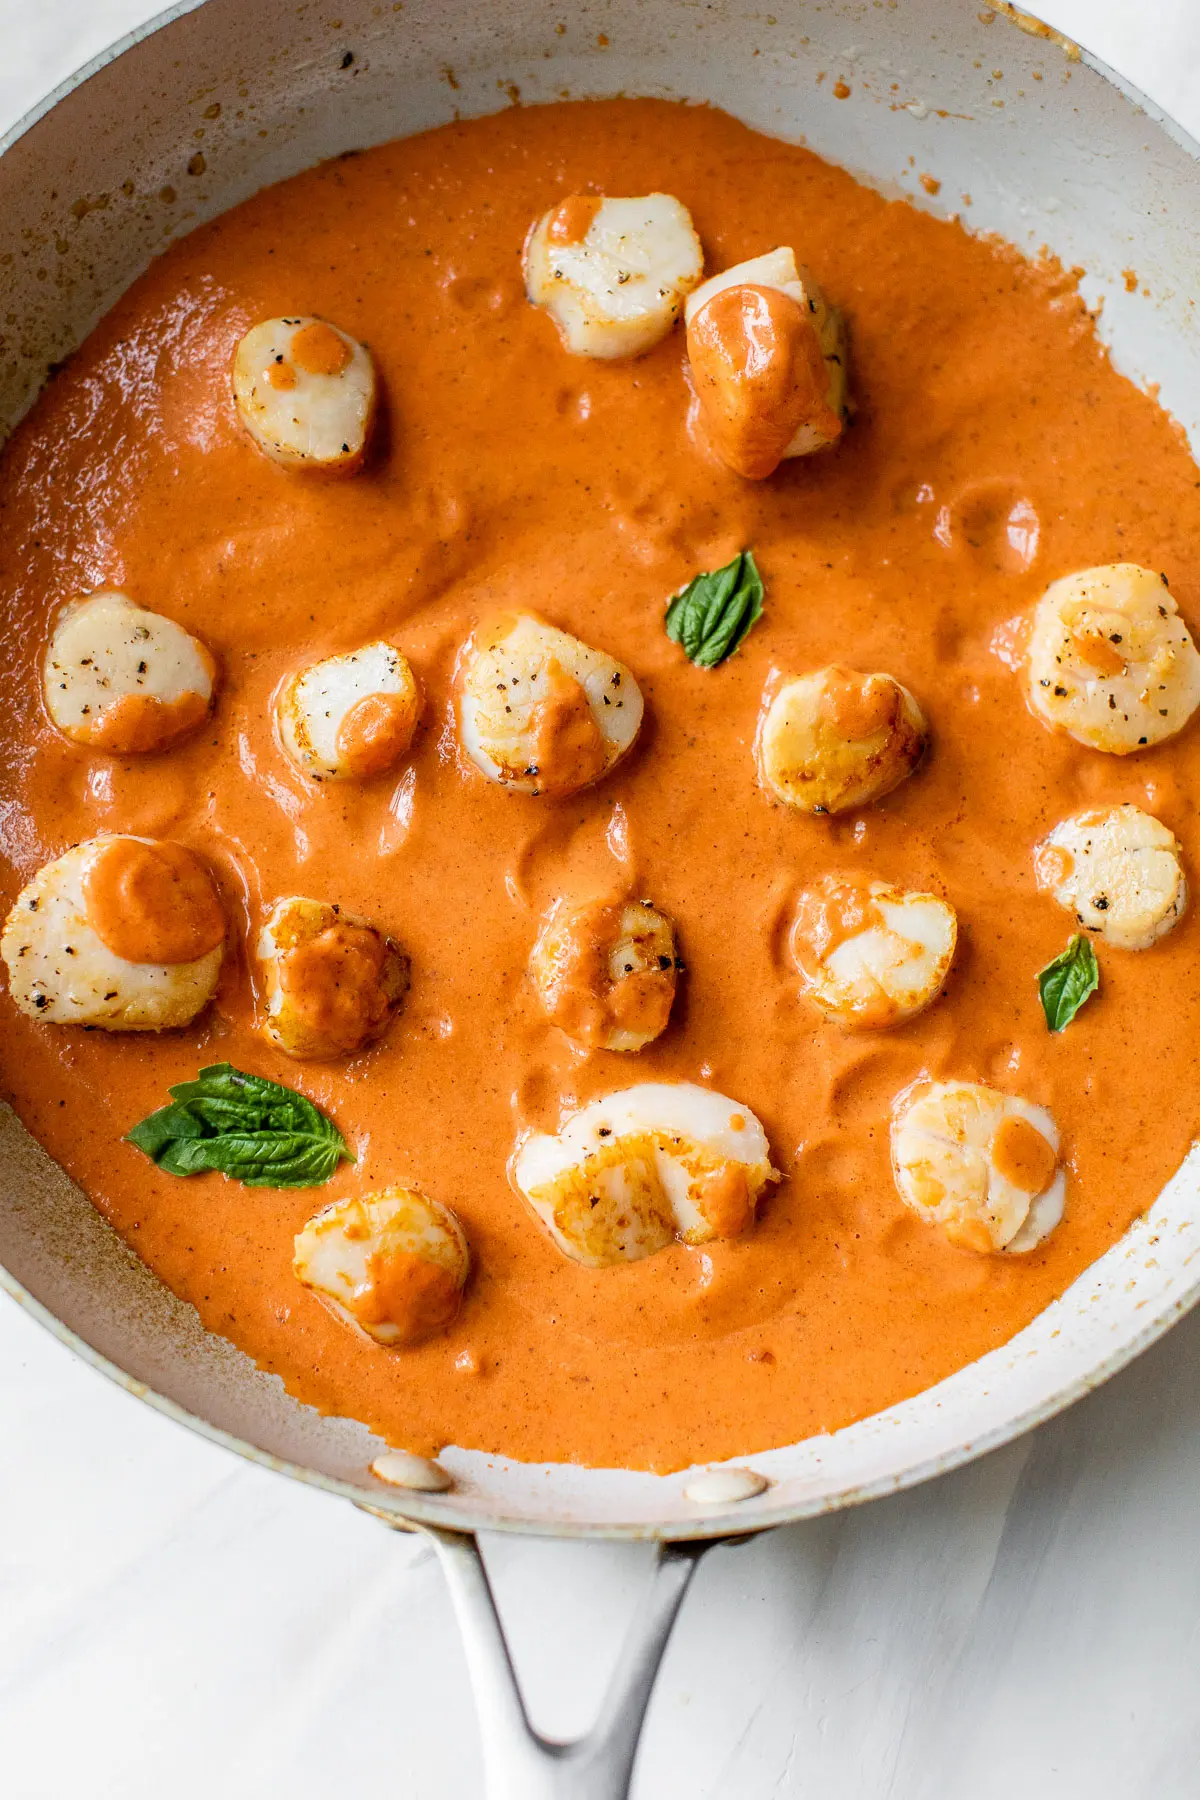 seared scallops in a large skillet with tomato sauce